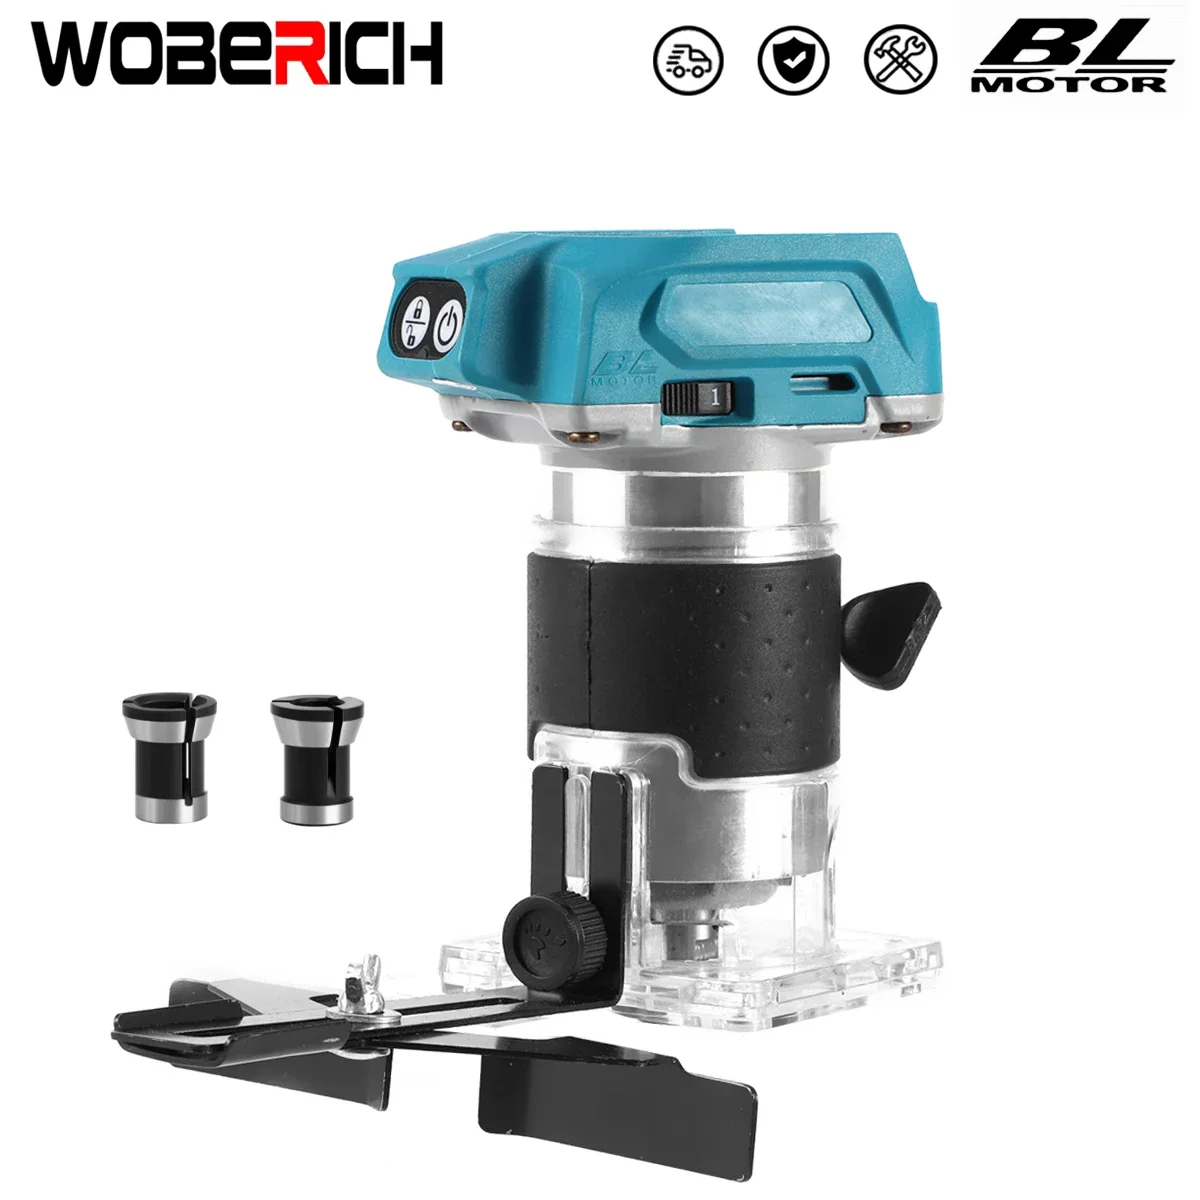 5 Speeds Brushless Electric Hand Trimmer Cordless Wood Router Woodworking Engraving Slotting Trimming Milling Machine For Makita 4pc set woodworking carving chisel 6mm 12mm 18mm 25mm wooden handle flat chisel for wood diy slotting trimming hand tools